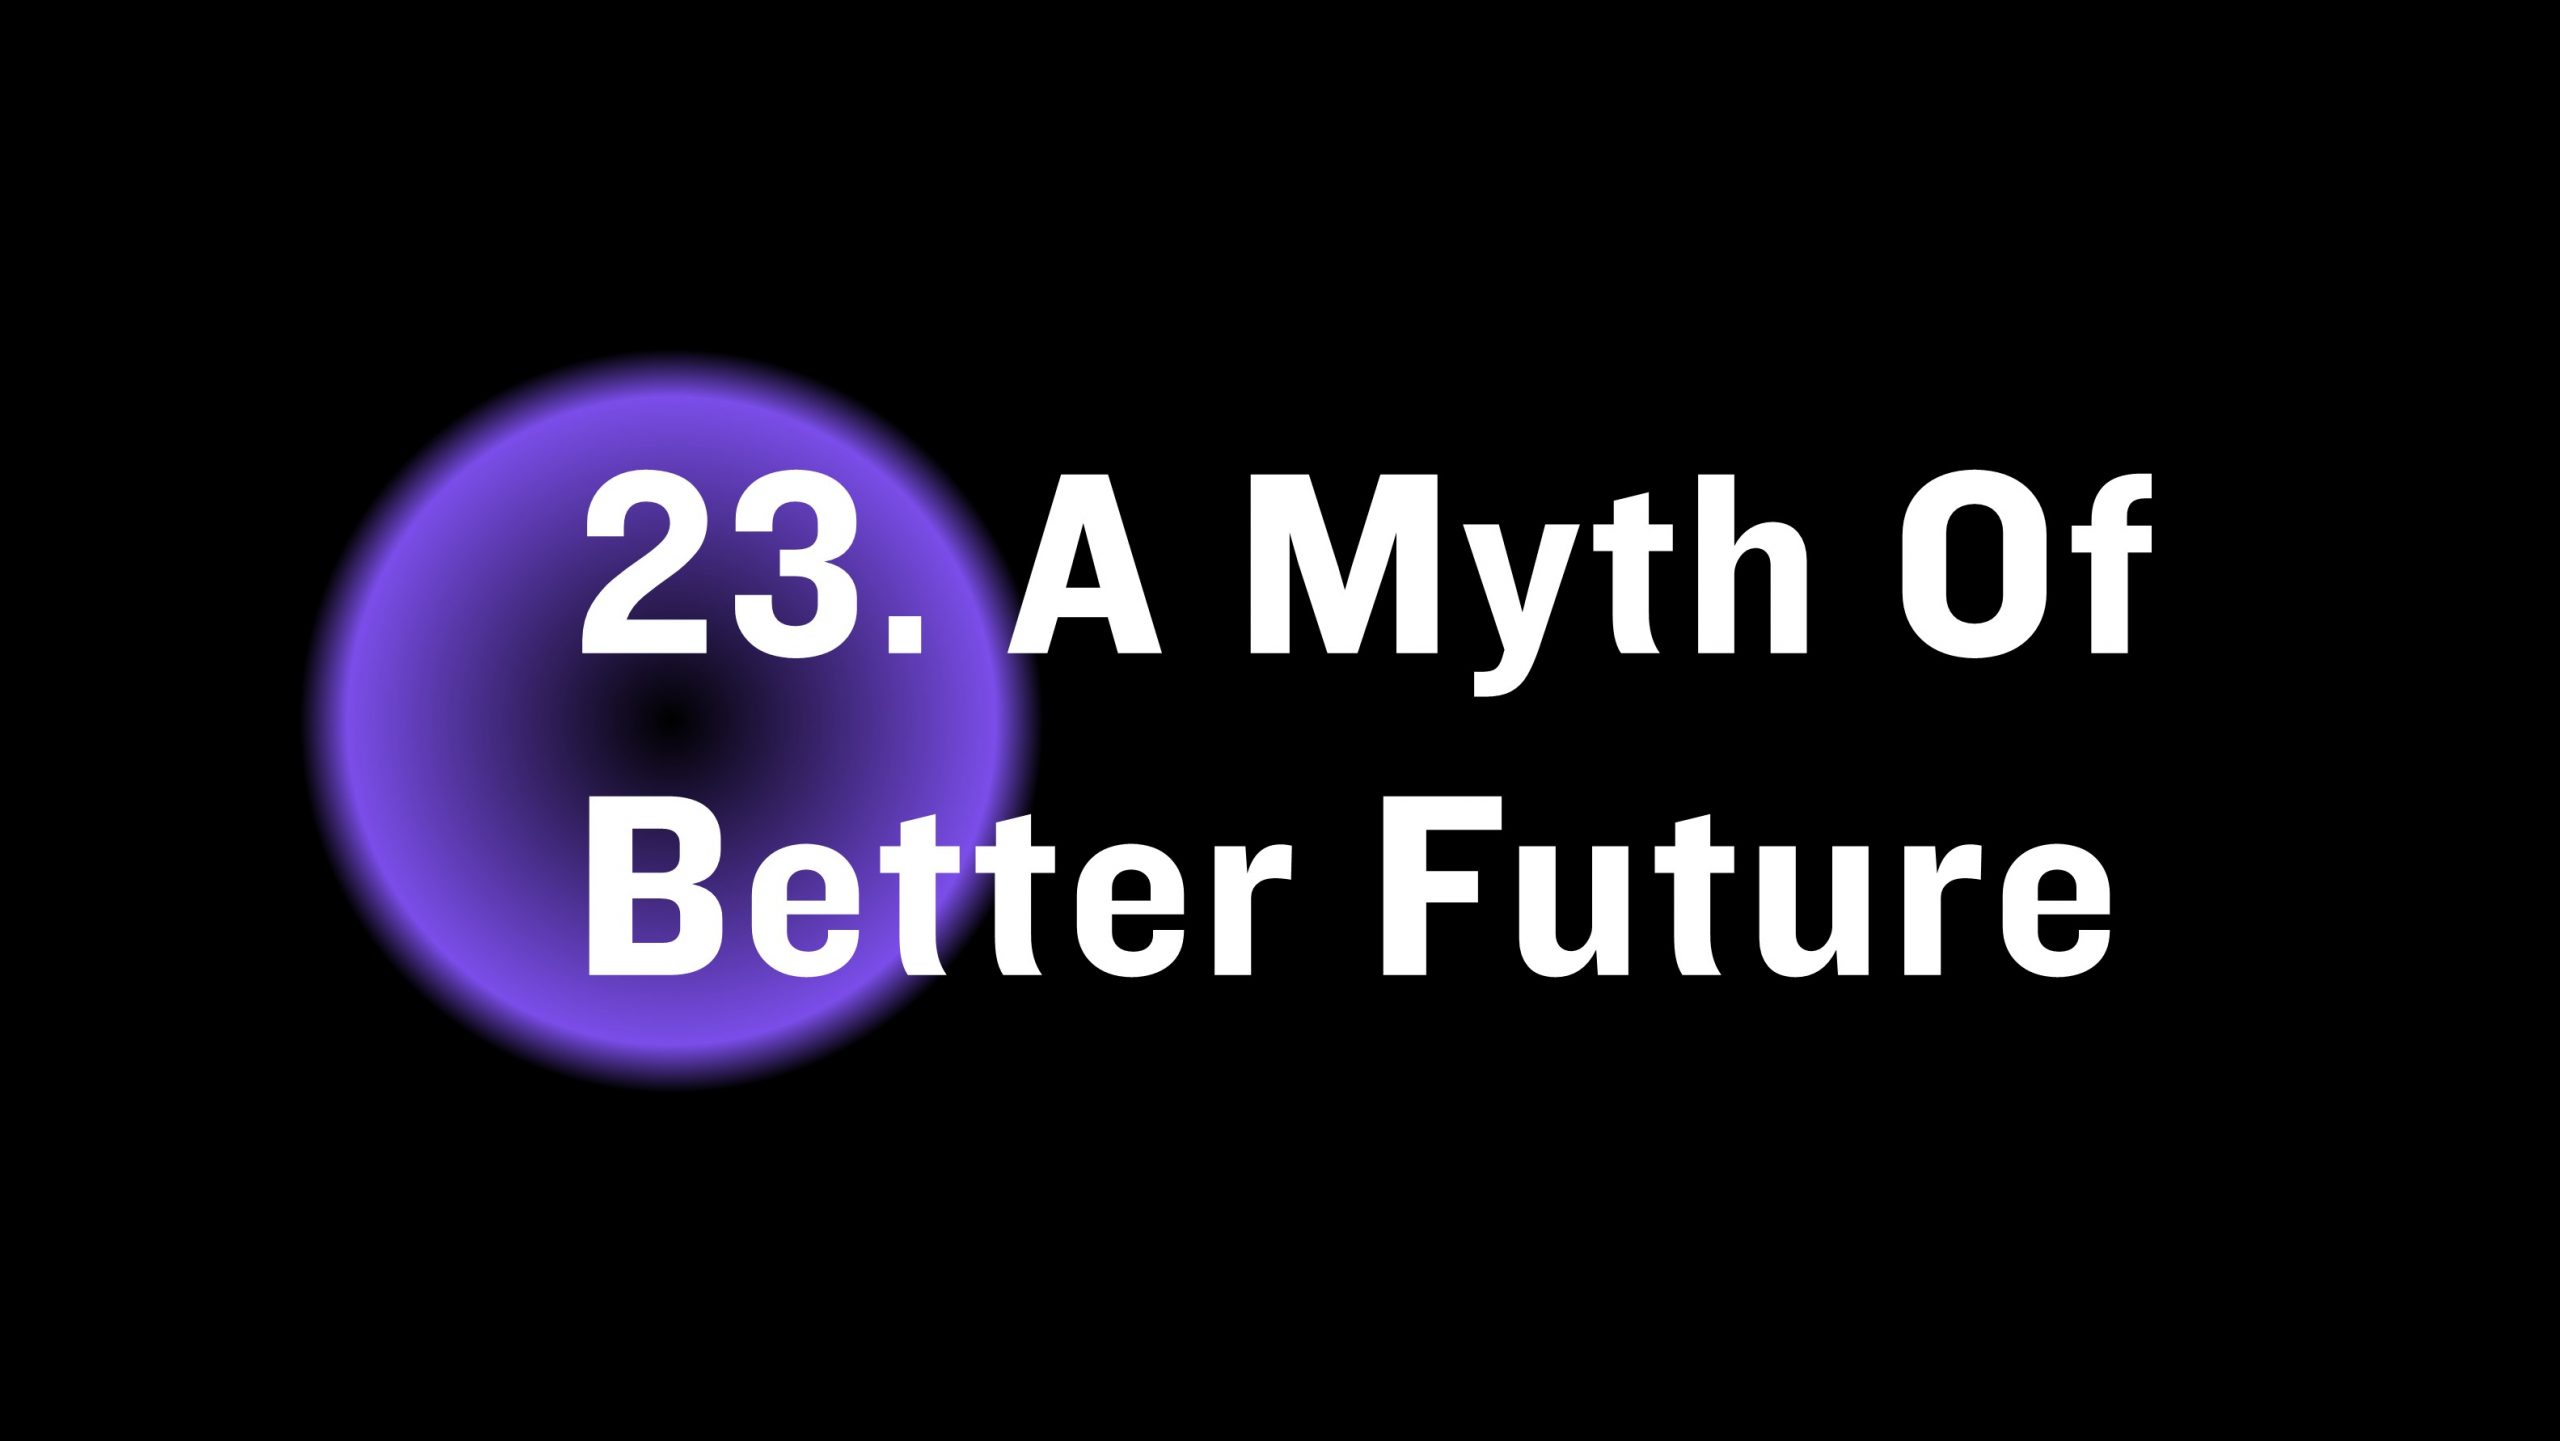 A myth of a better future